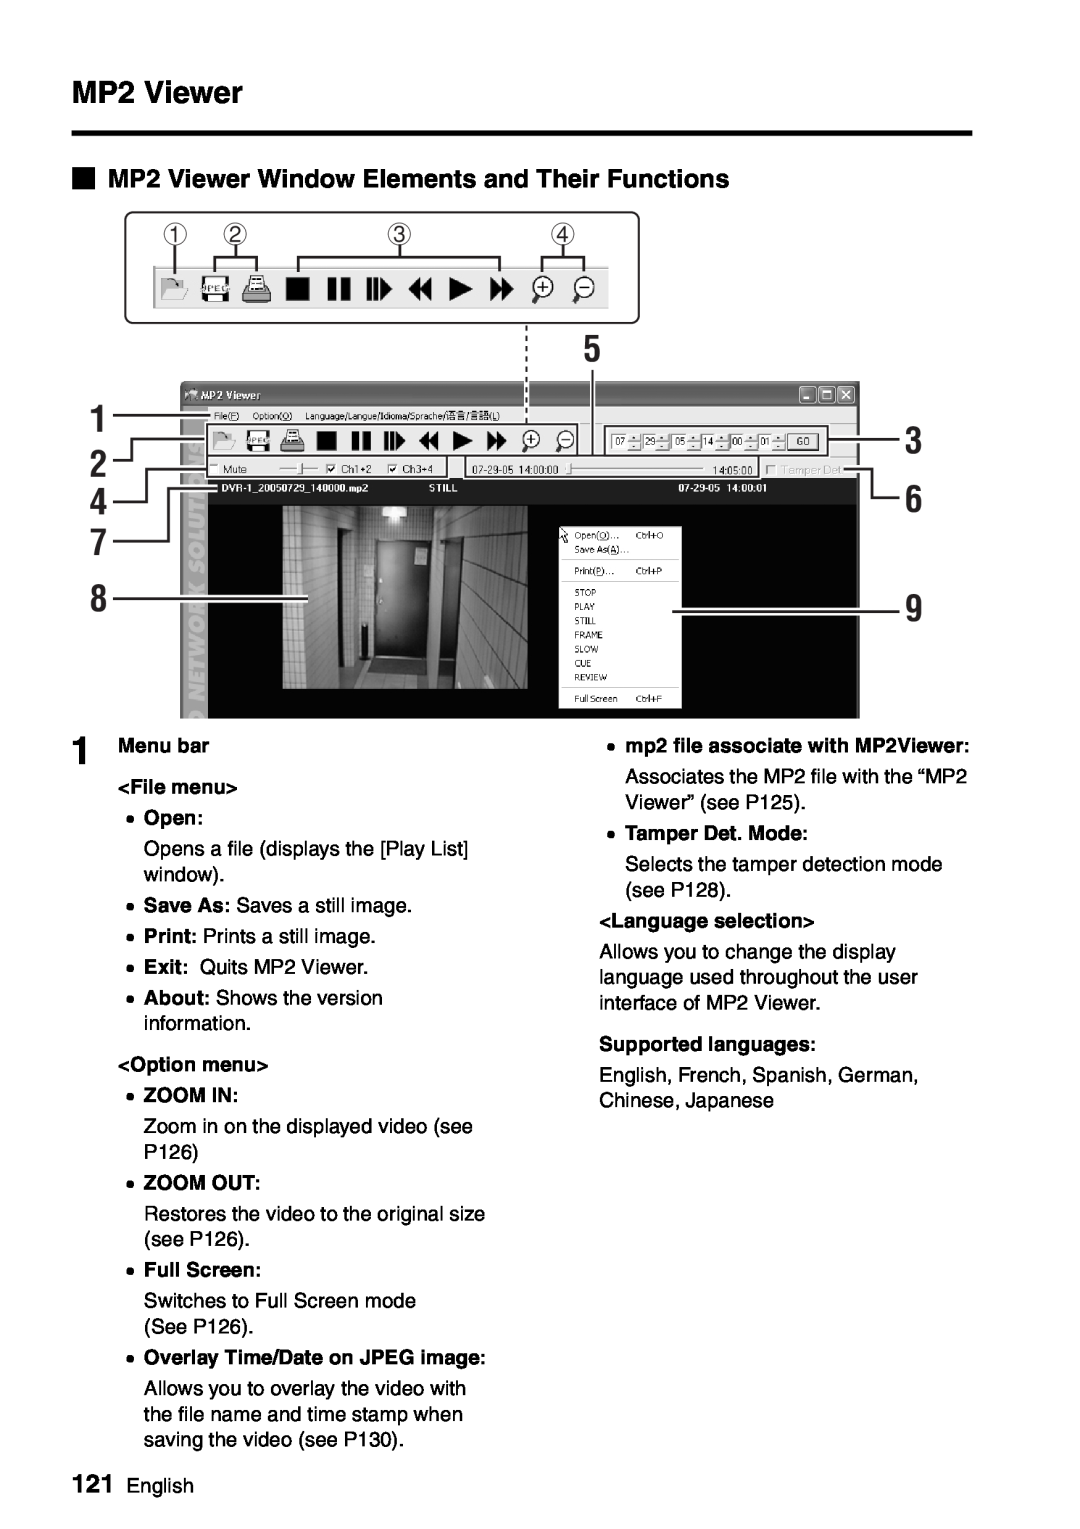 Sanyo VA-SW8000 1 2 4 7, 5 3 6, bMP2 Viewer Window Elements and Their Functions, Menu bar <File menu> •Open, •Zoom Out 